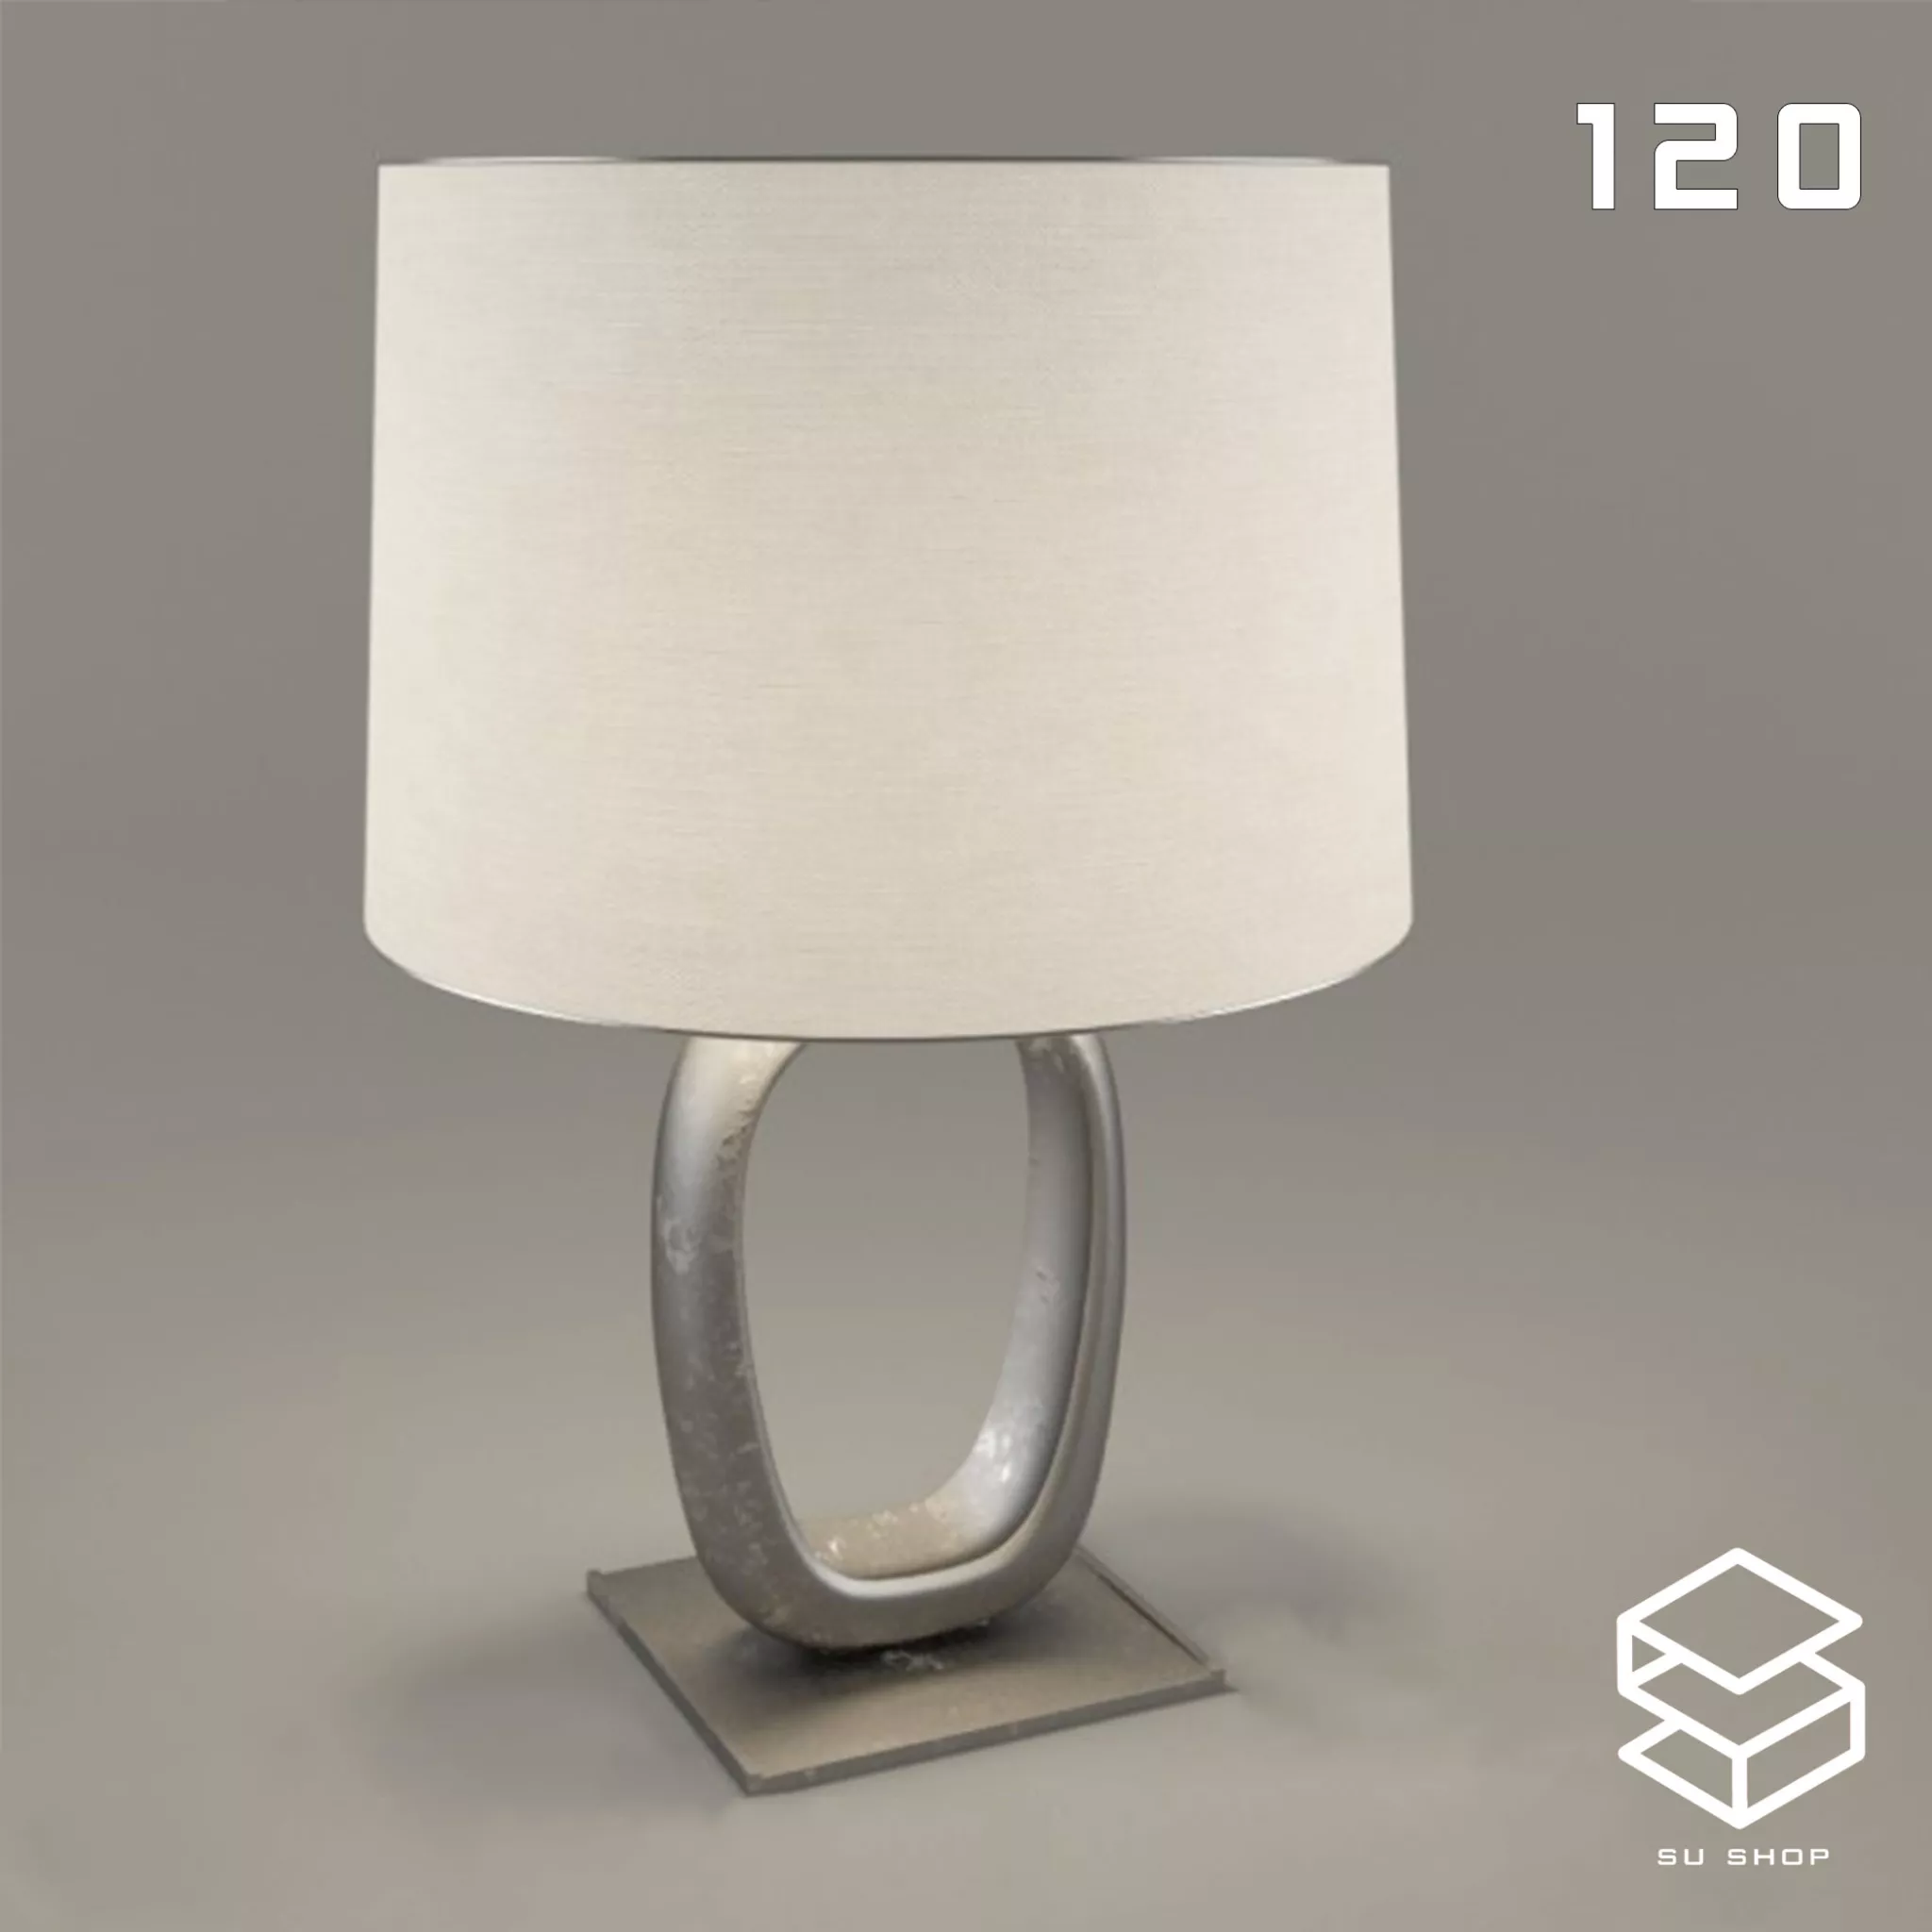 MODERN TABLE LAMP - SKETCHUP 3D MODEL - VRAY OR ENSCAPE - ID14687